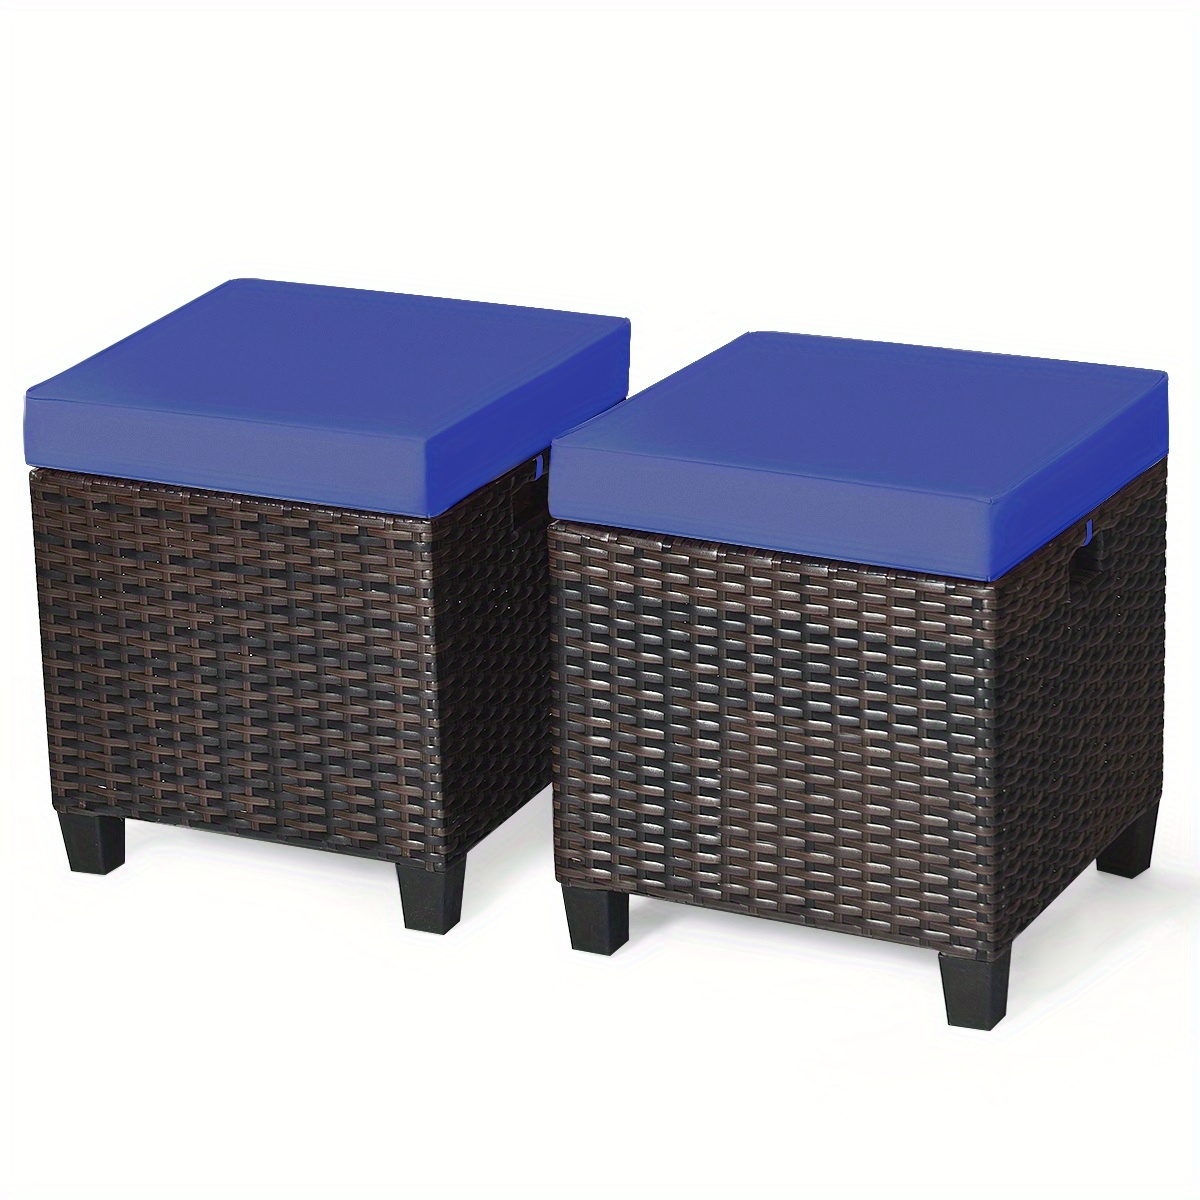 

Lifezeal 2pcs Patio Rattan Ottoman Cushioned Seat Foot Rest Coffee Table Furniture Garden